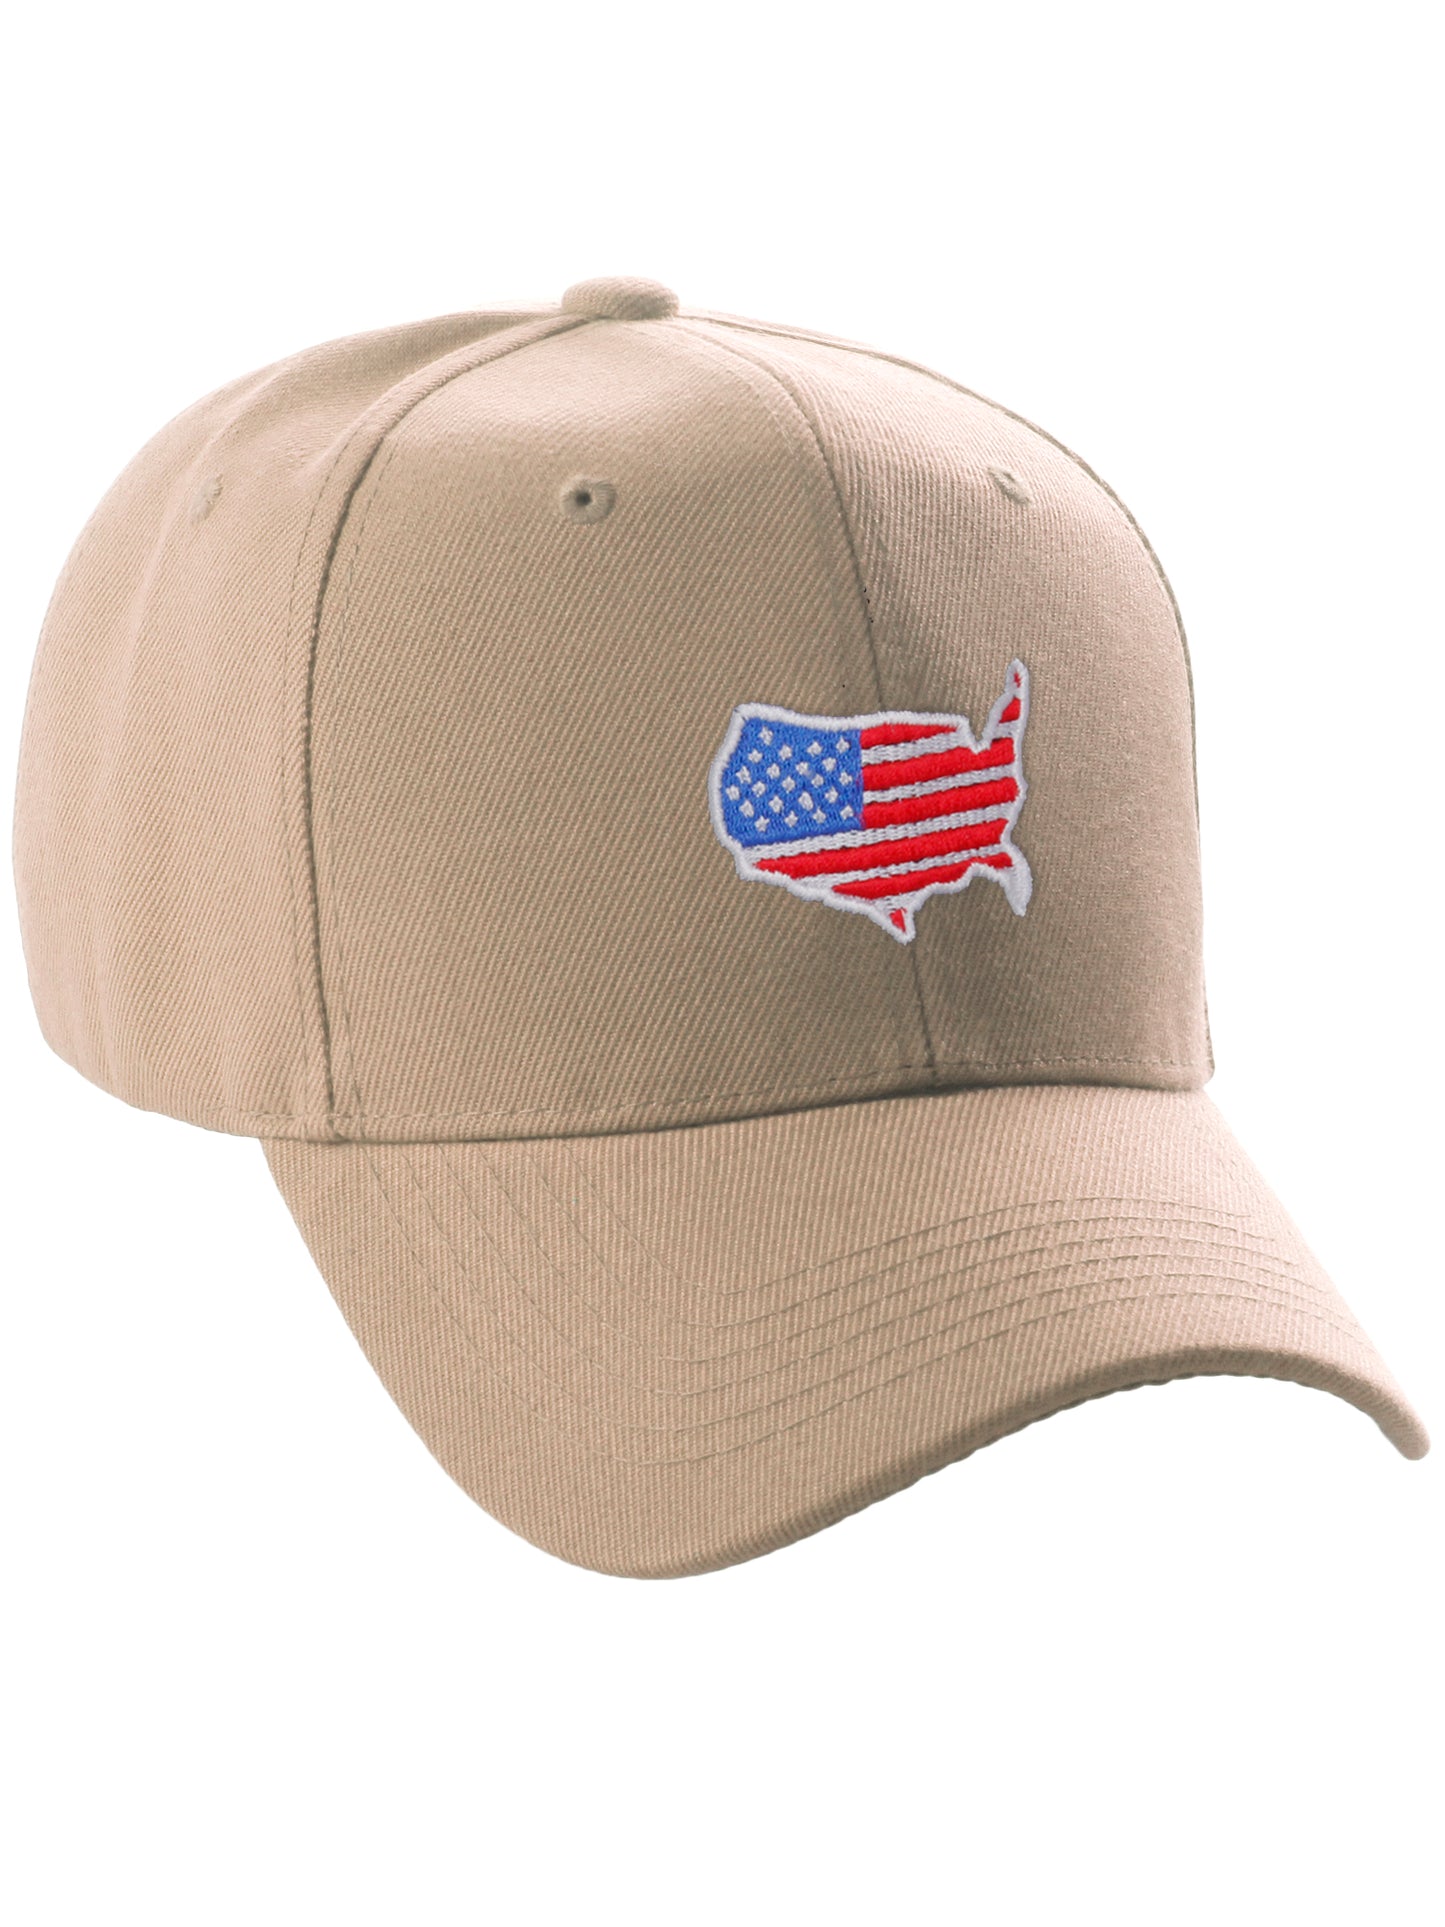 Daxton Classic Structured Embroidered USA Flag Baseball Cap Adjustable Curved Visor